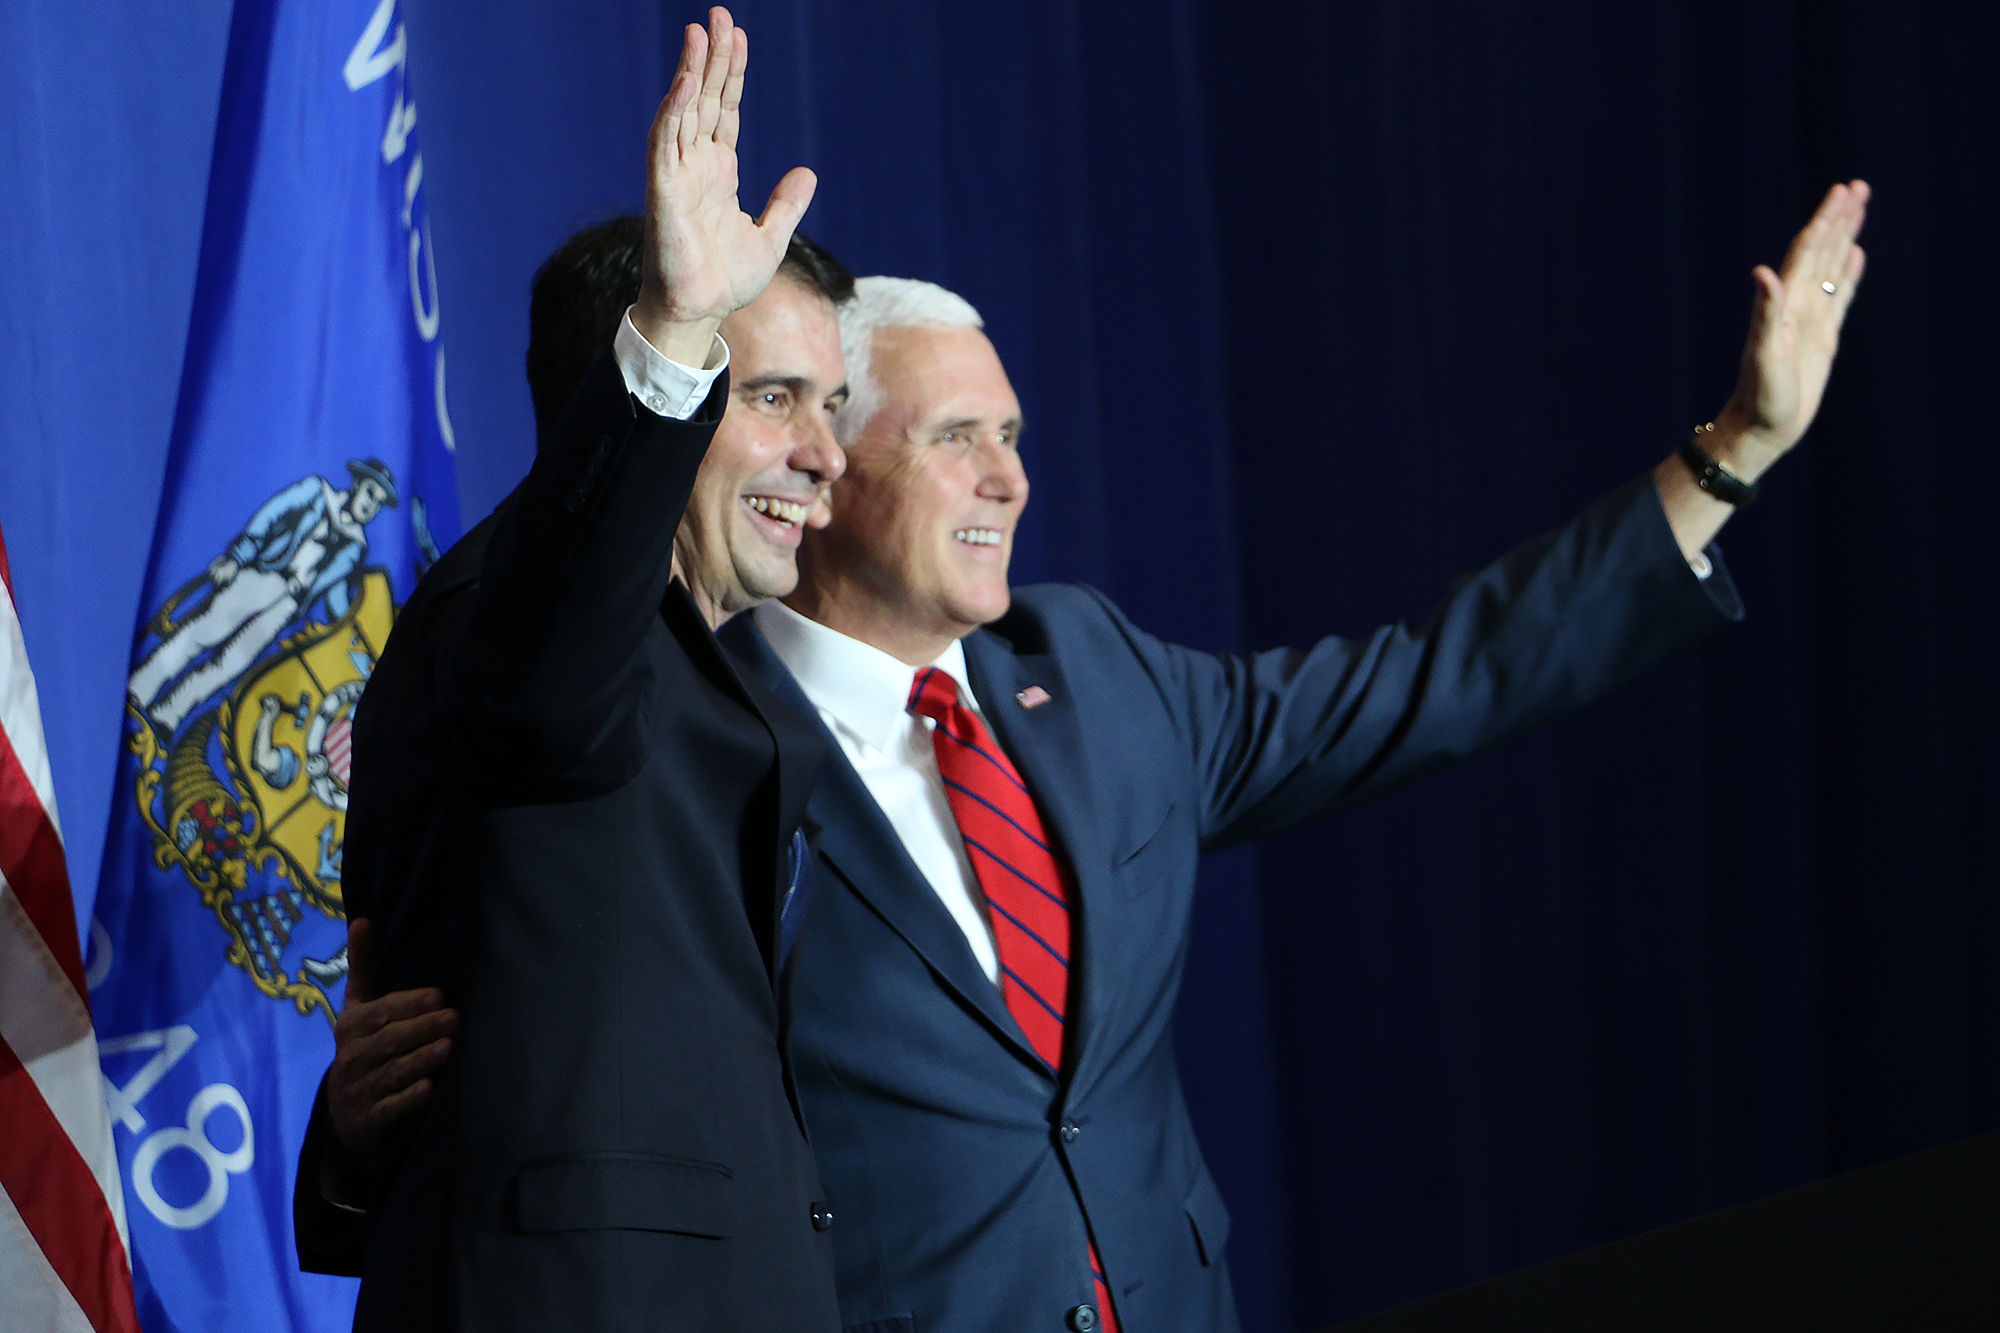 Vice President Mike Pence meets Gov. Scott Walker during a campaign fundraiser